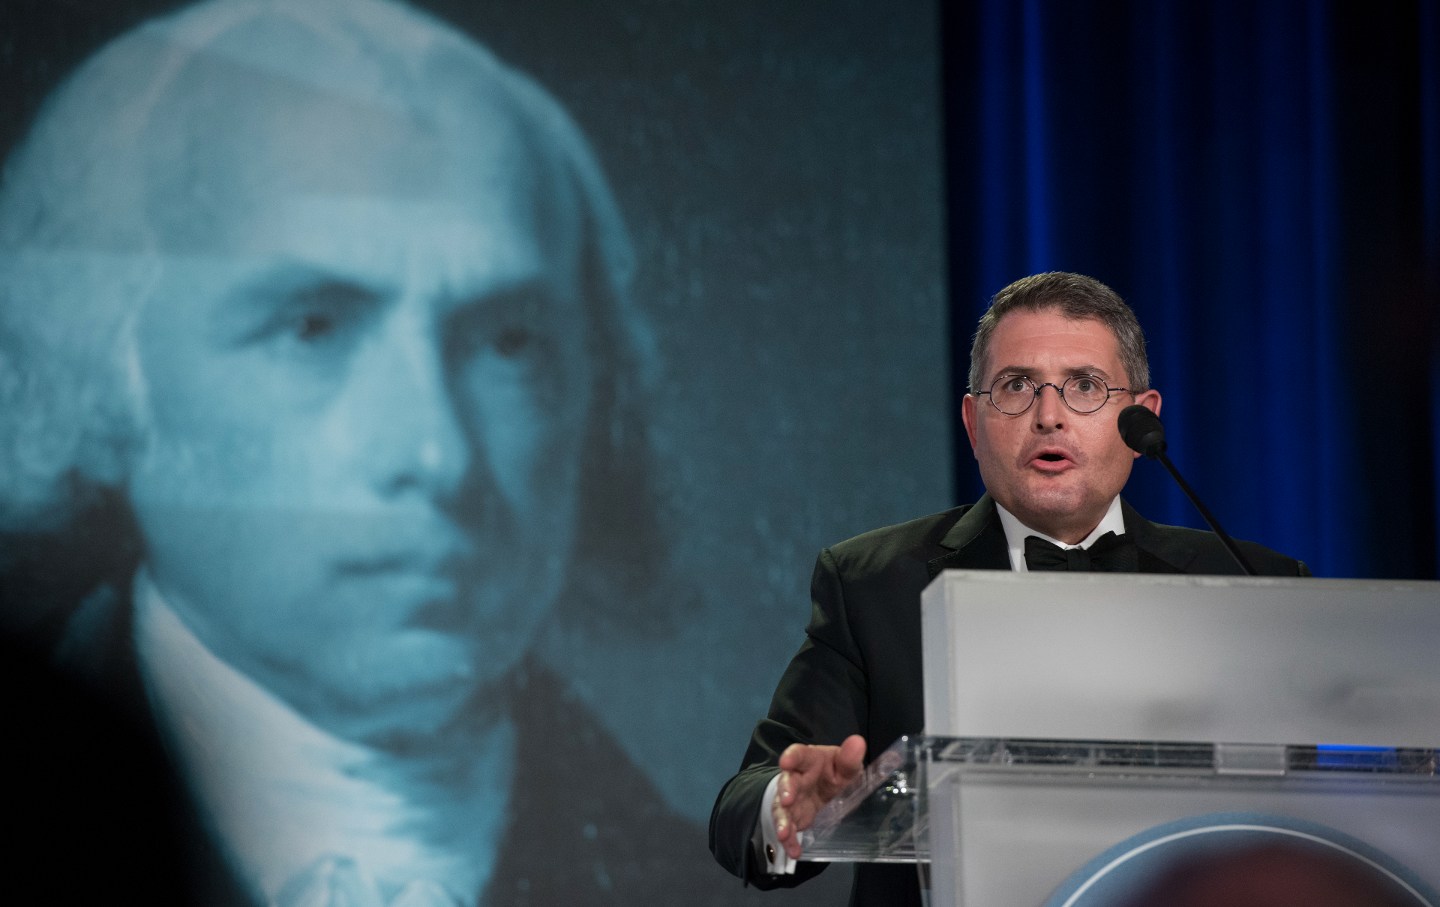 Leonard Leo, the executive vice president of the Federalist Society, speaks at the 2017 National Lawyers Convention in Washington, D.C., on November 16, 2017.